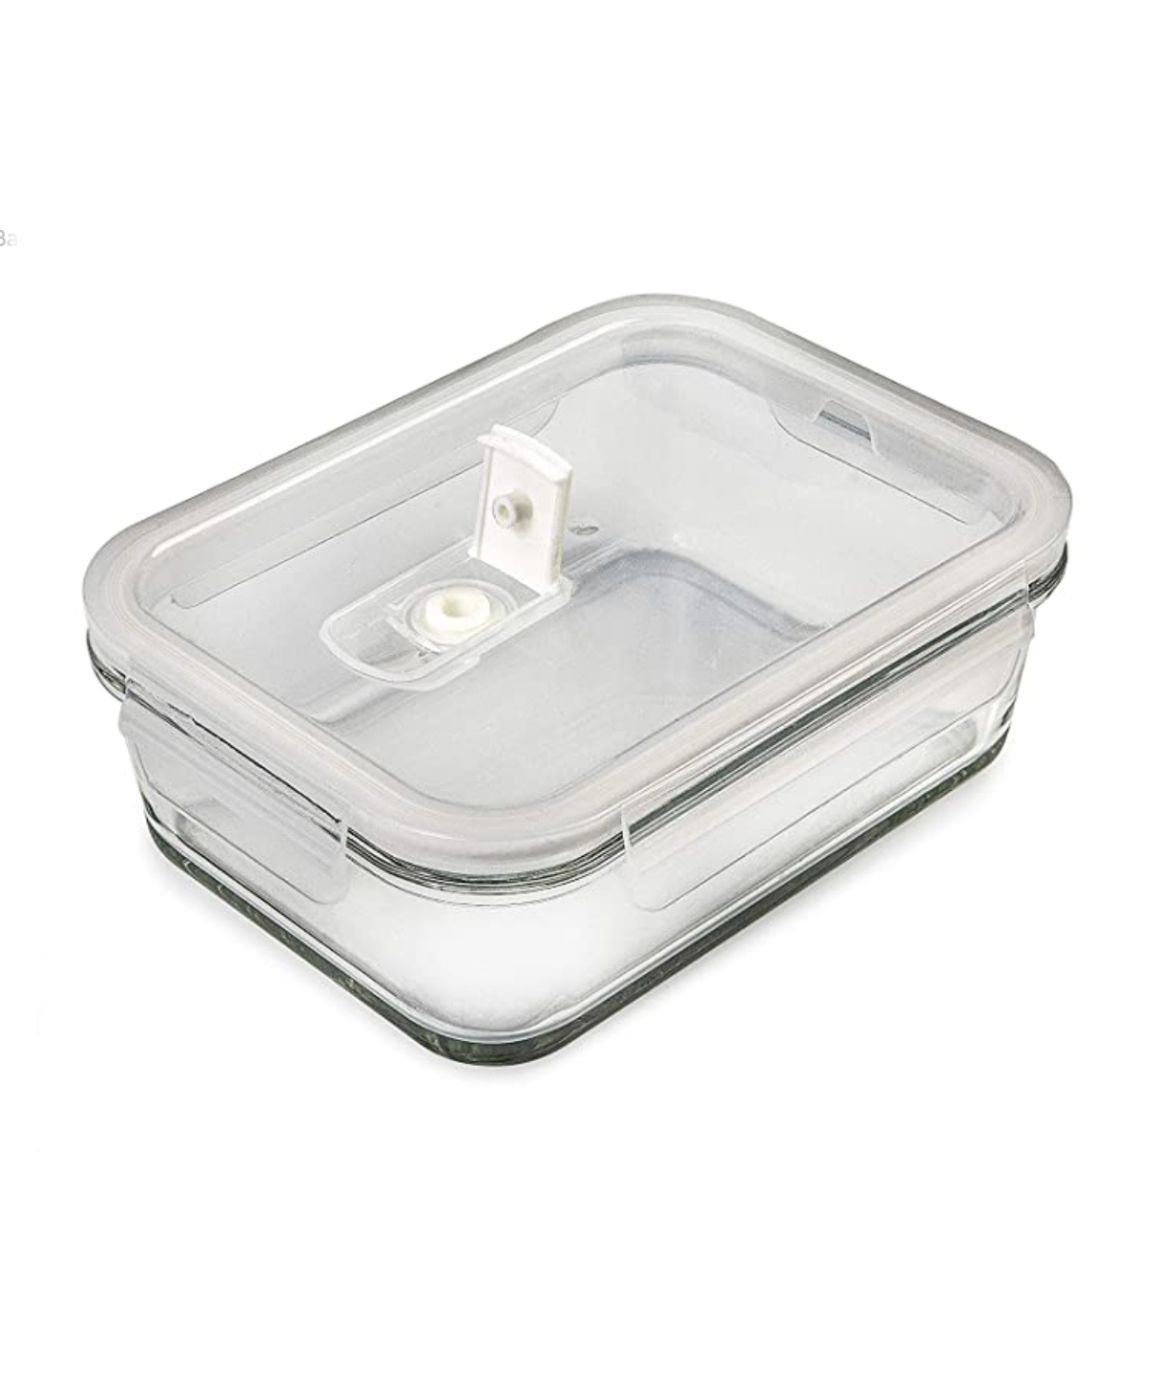 Air-tight container